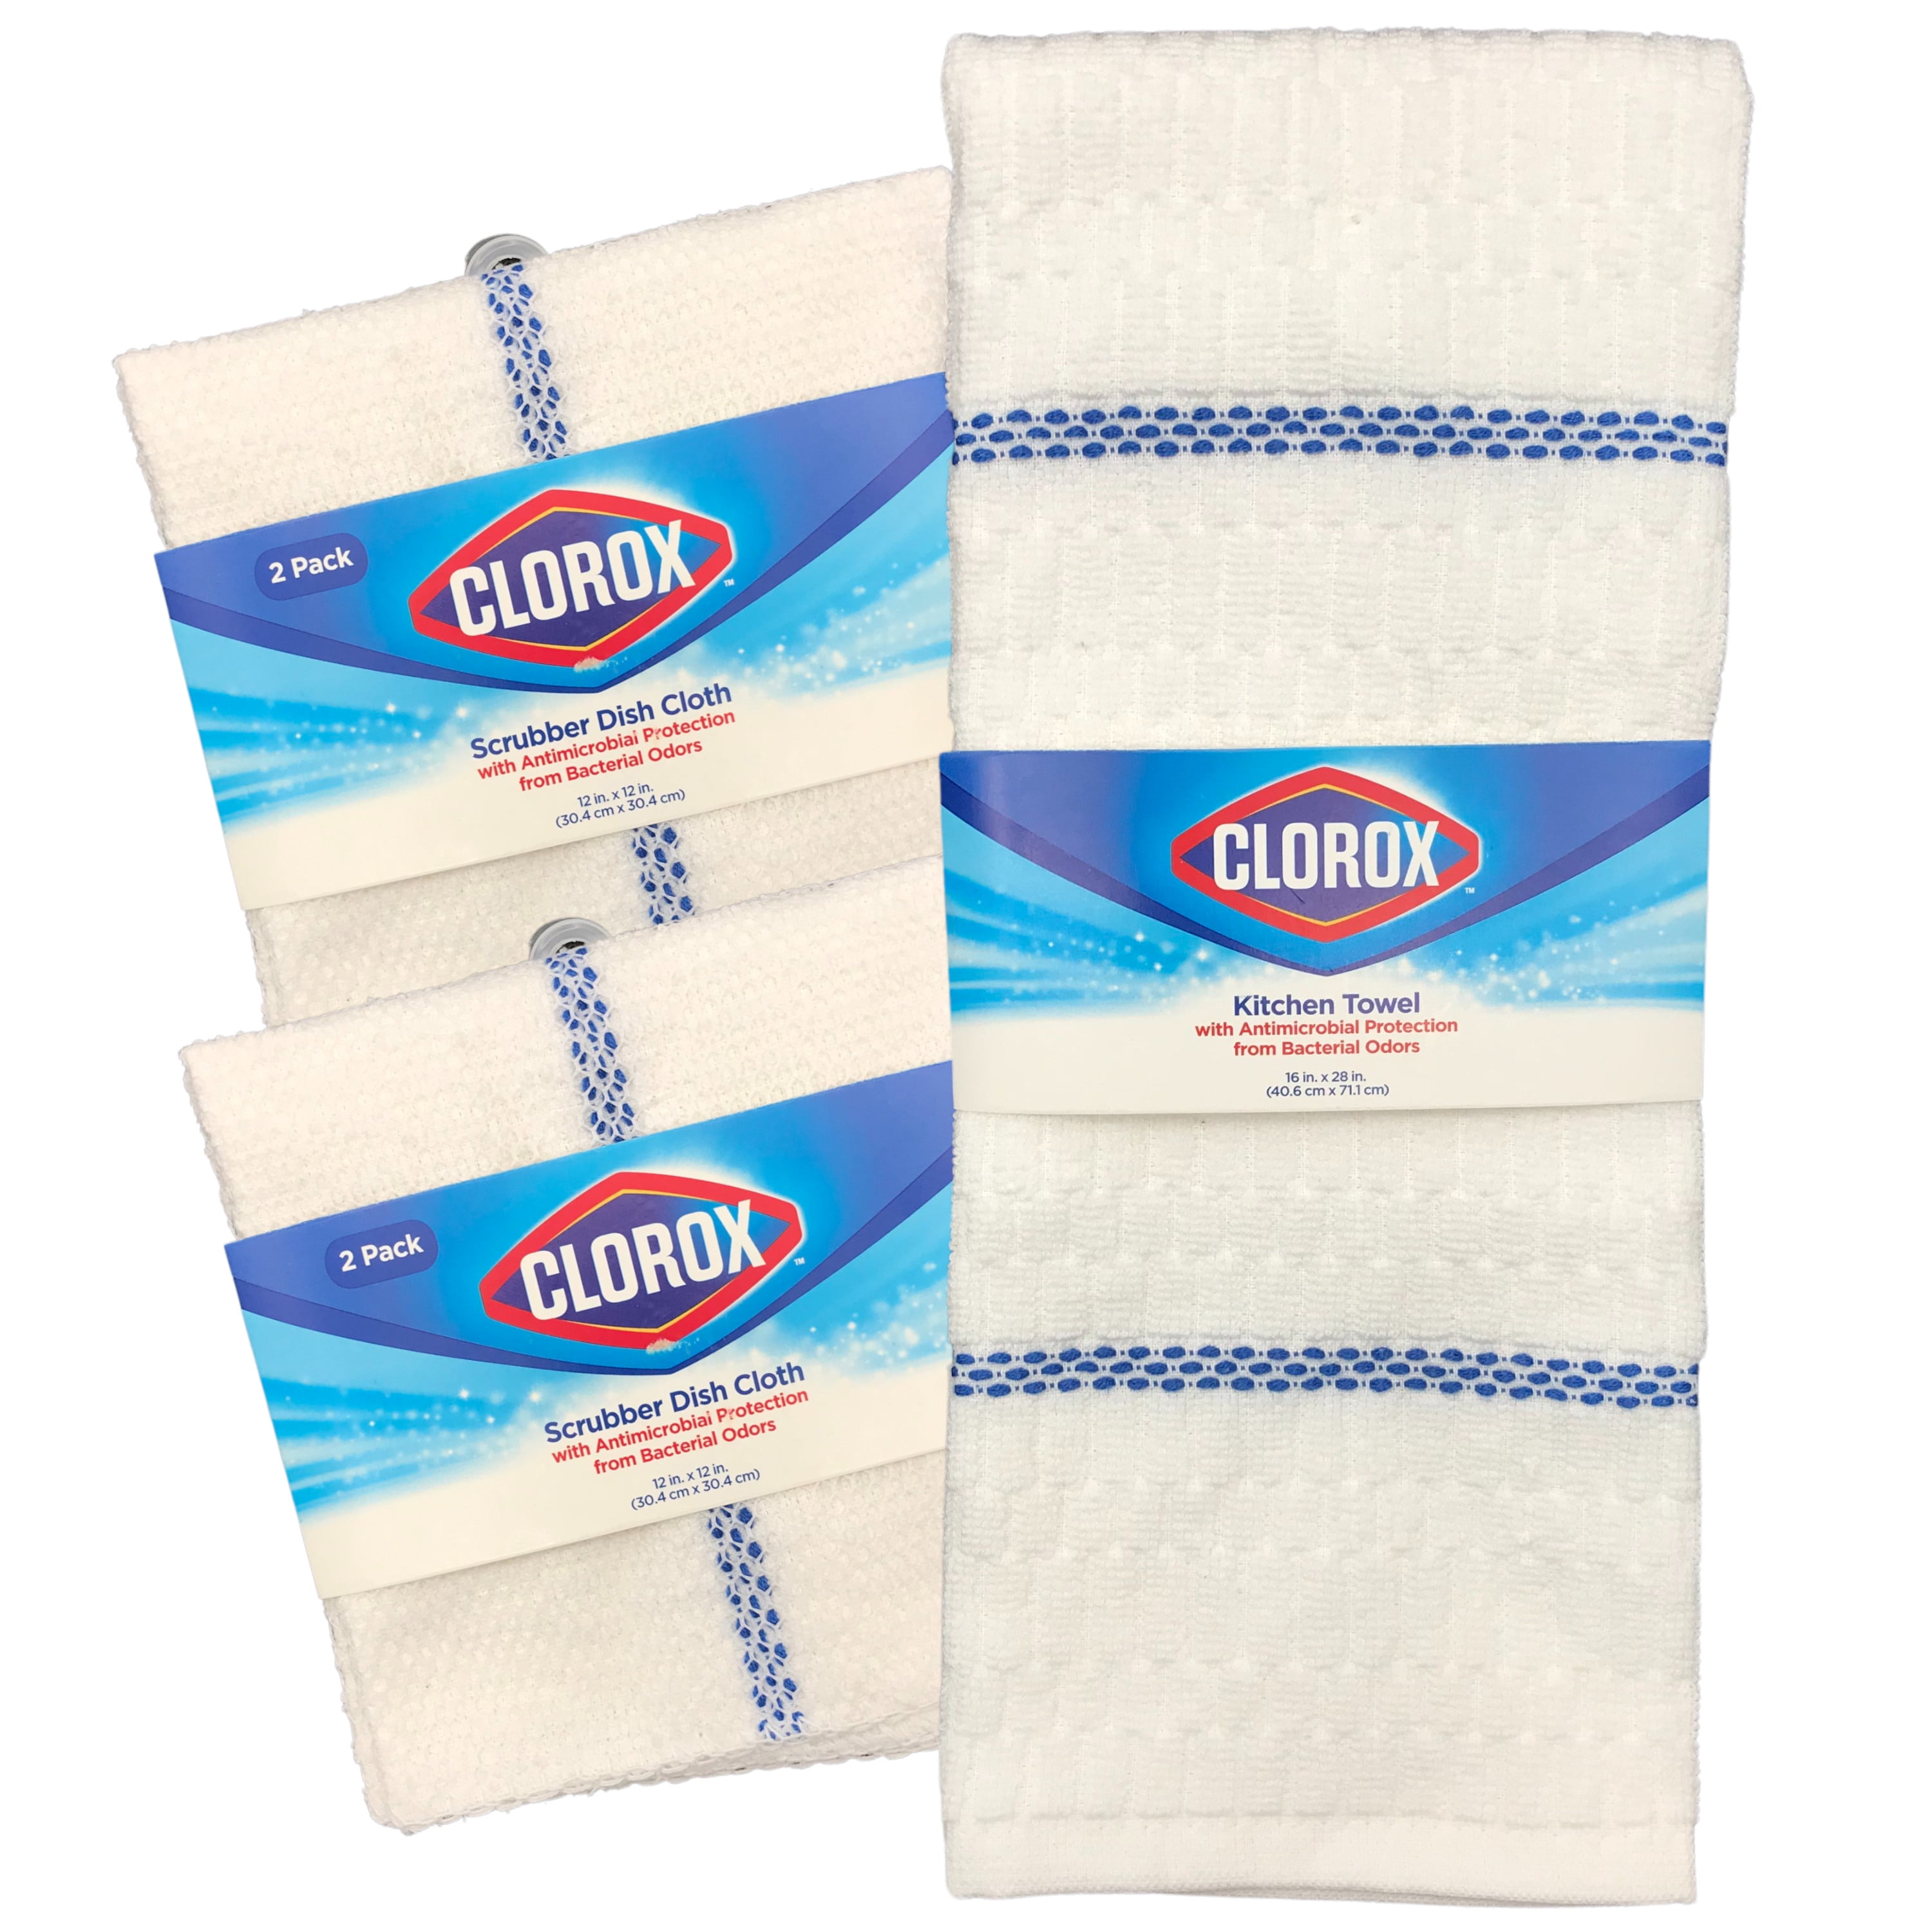 TOWN & COUNTRY LIVING Clorox White/Red Antimicrobial Solid Cotton Kitchen  Towel Set (2-Pack) K2012061TDCX 640 - The Home Depot